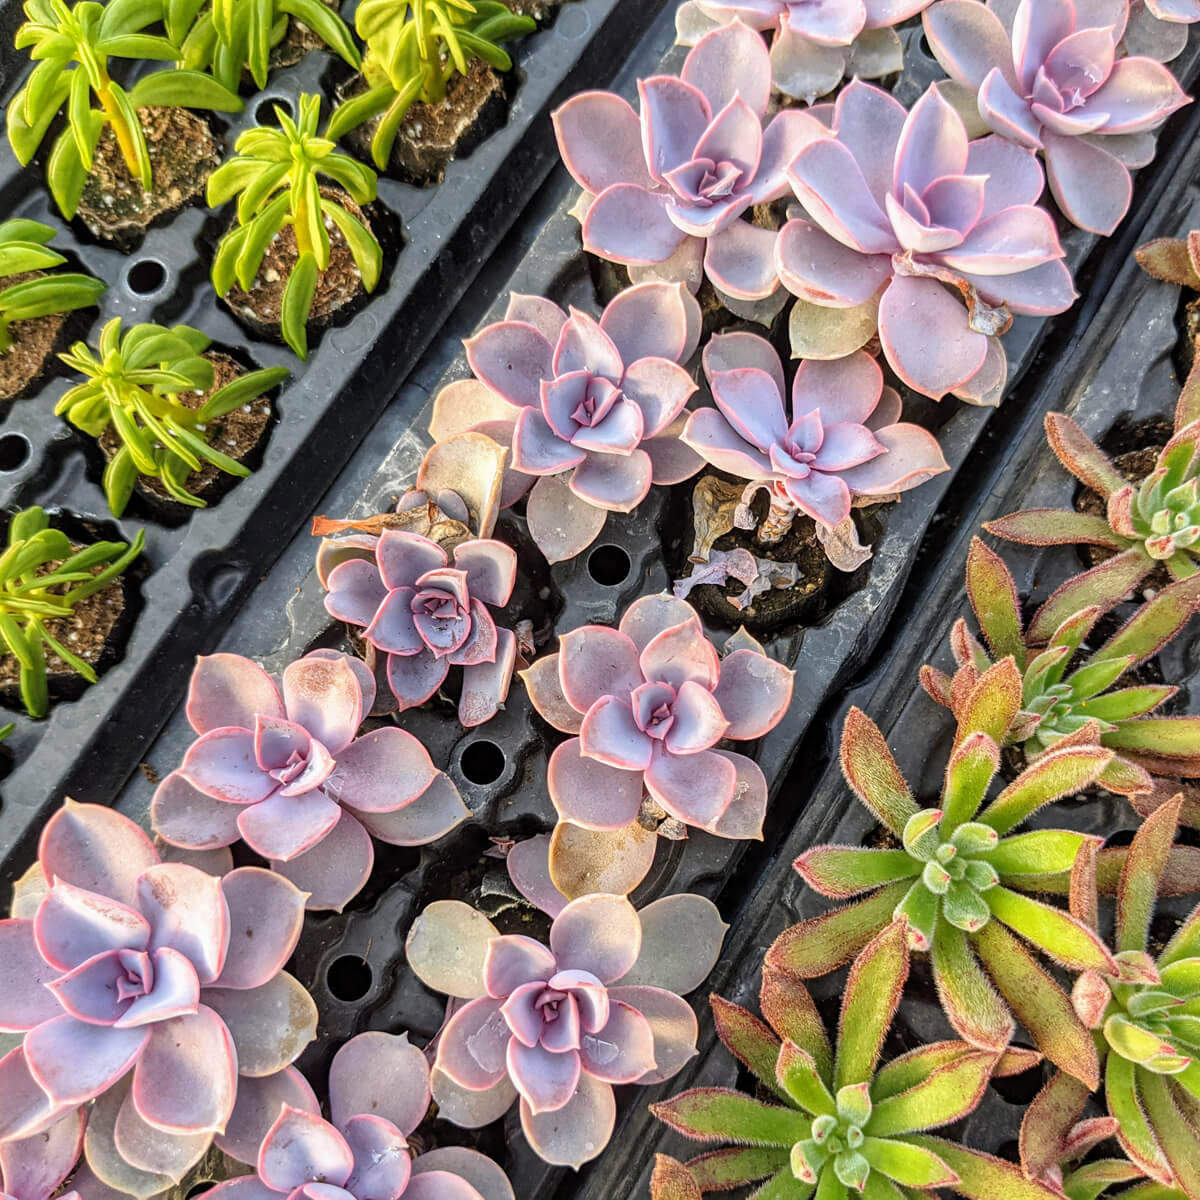 So Many Succulents at Glick's Greenhouse